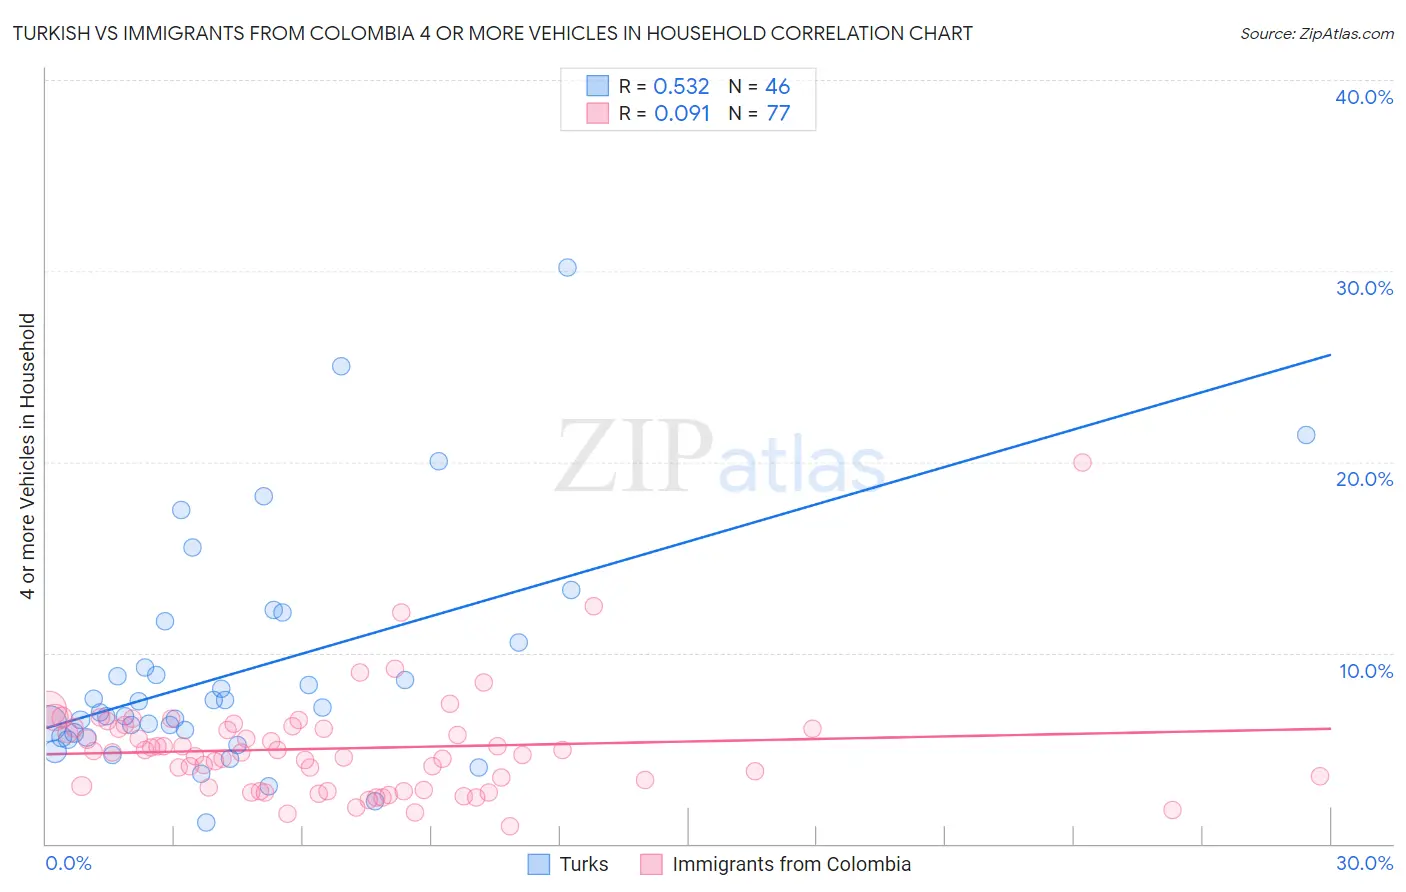 Turkish vs Immigrants from Colombia 4 or more Vehicles in Household